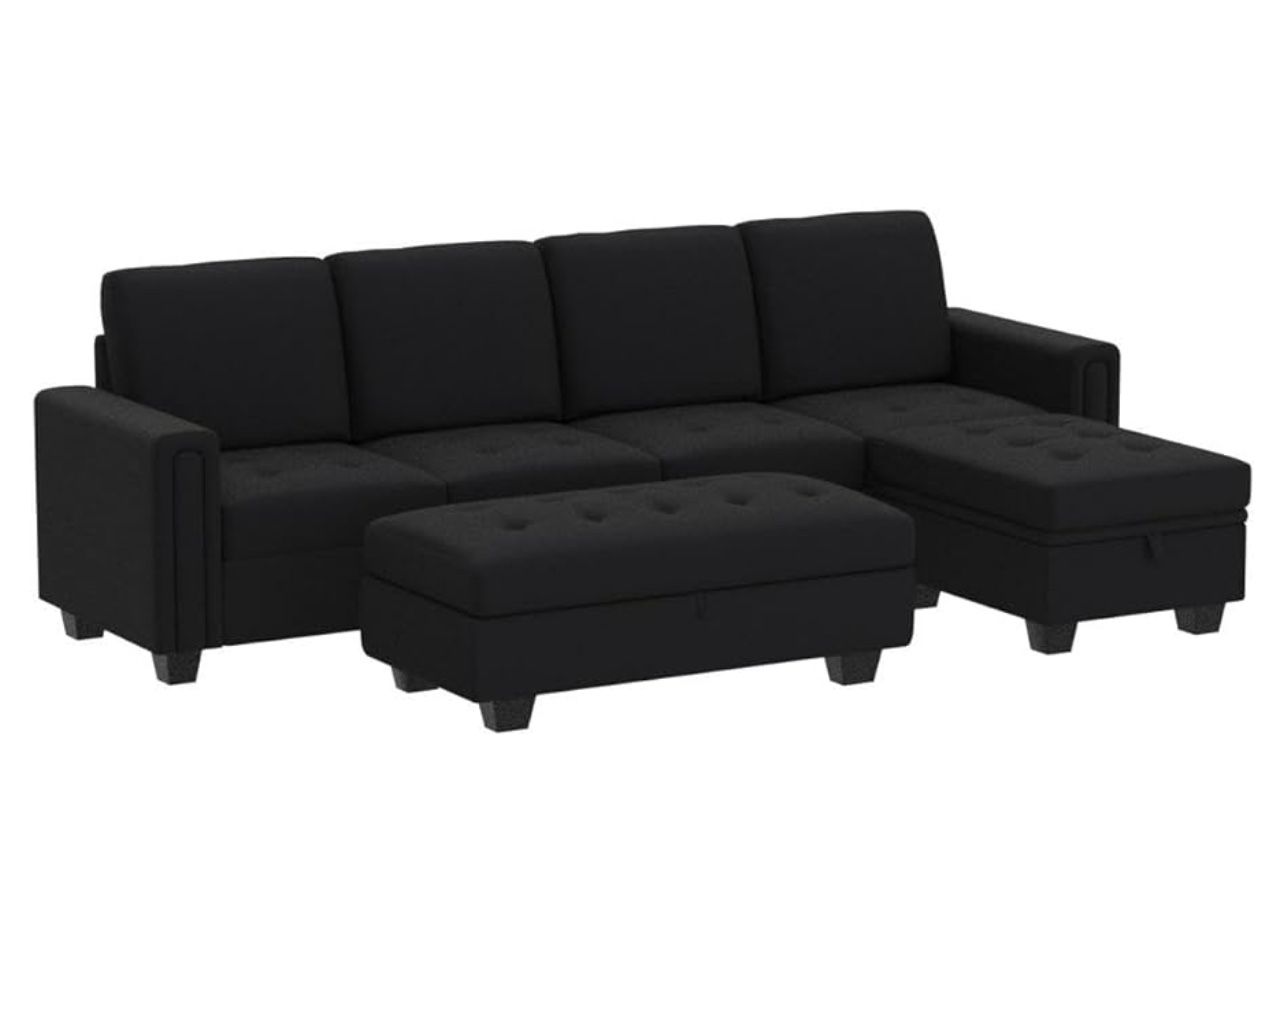 Velvet 4 Seat Couch w/ Reversible L Shaped Chaise